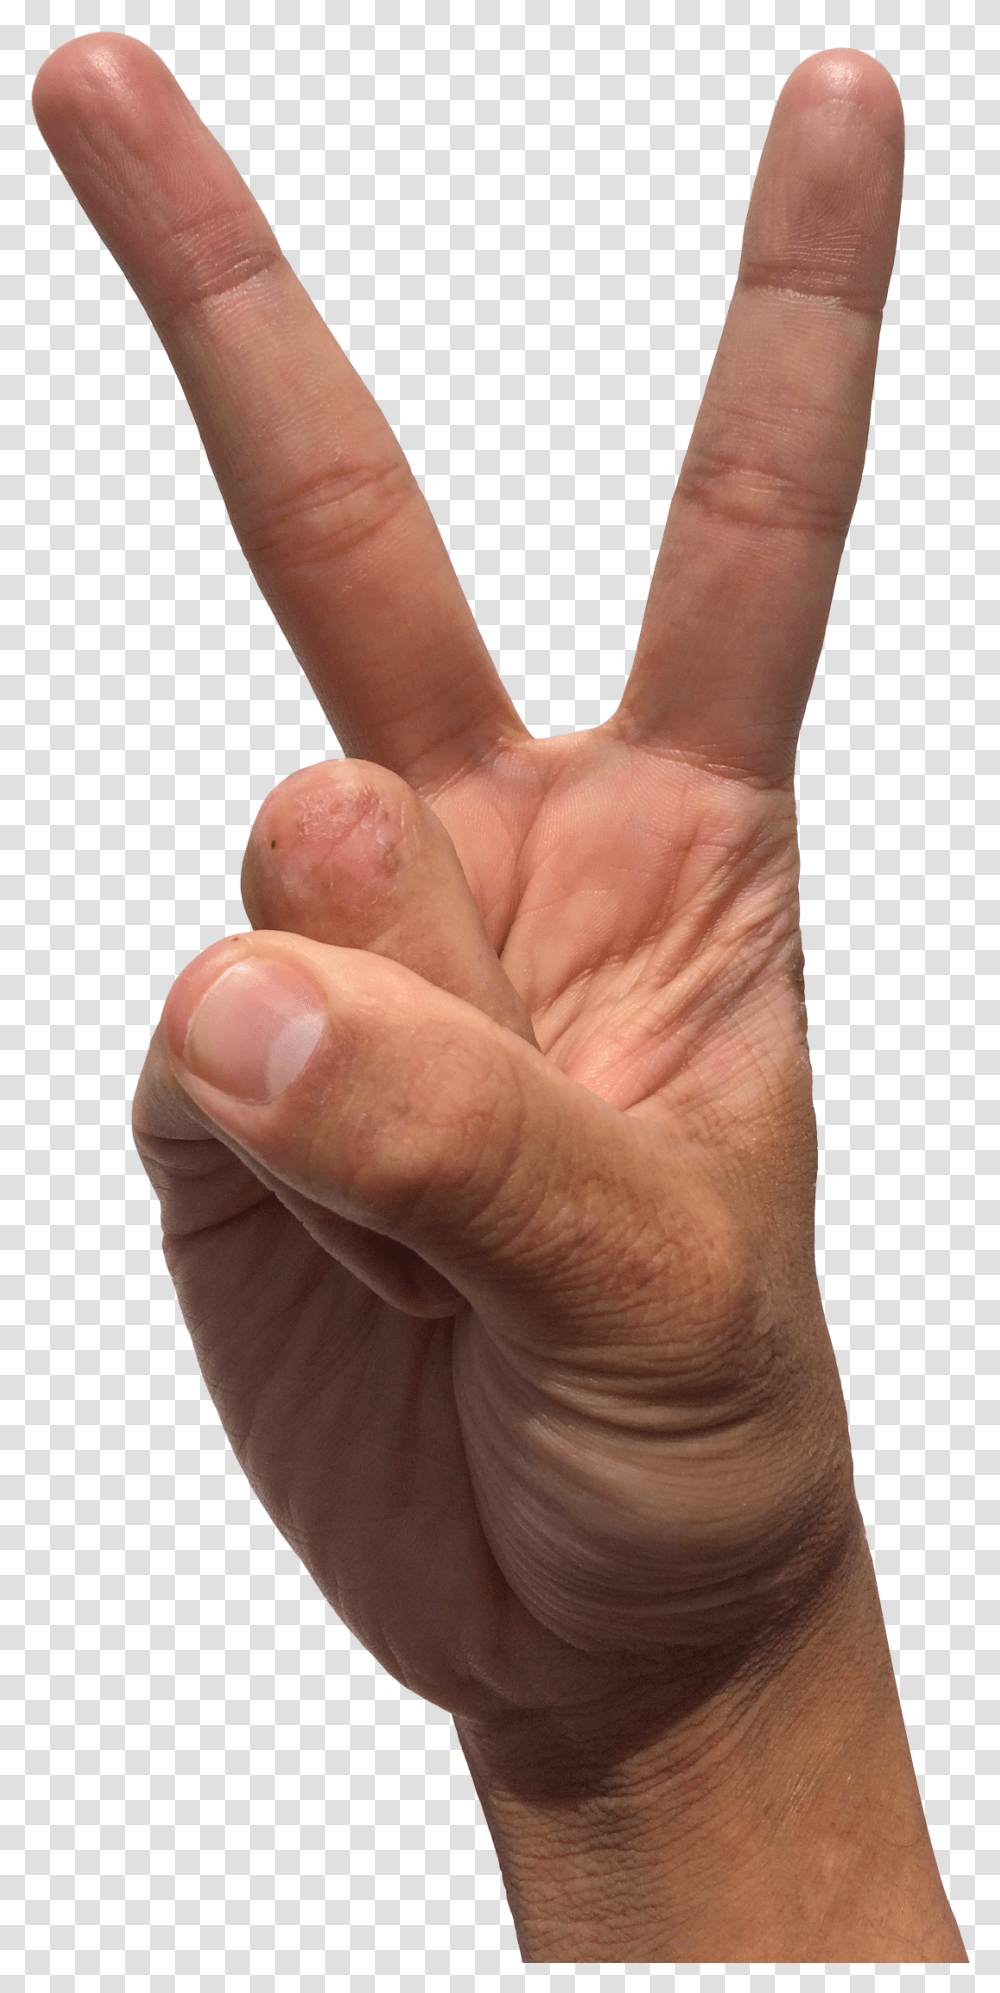 Mobile Phone In Hand Image Pngpix Peace Sign Hand, Finger, Person, Human Transparent Png